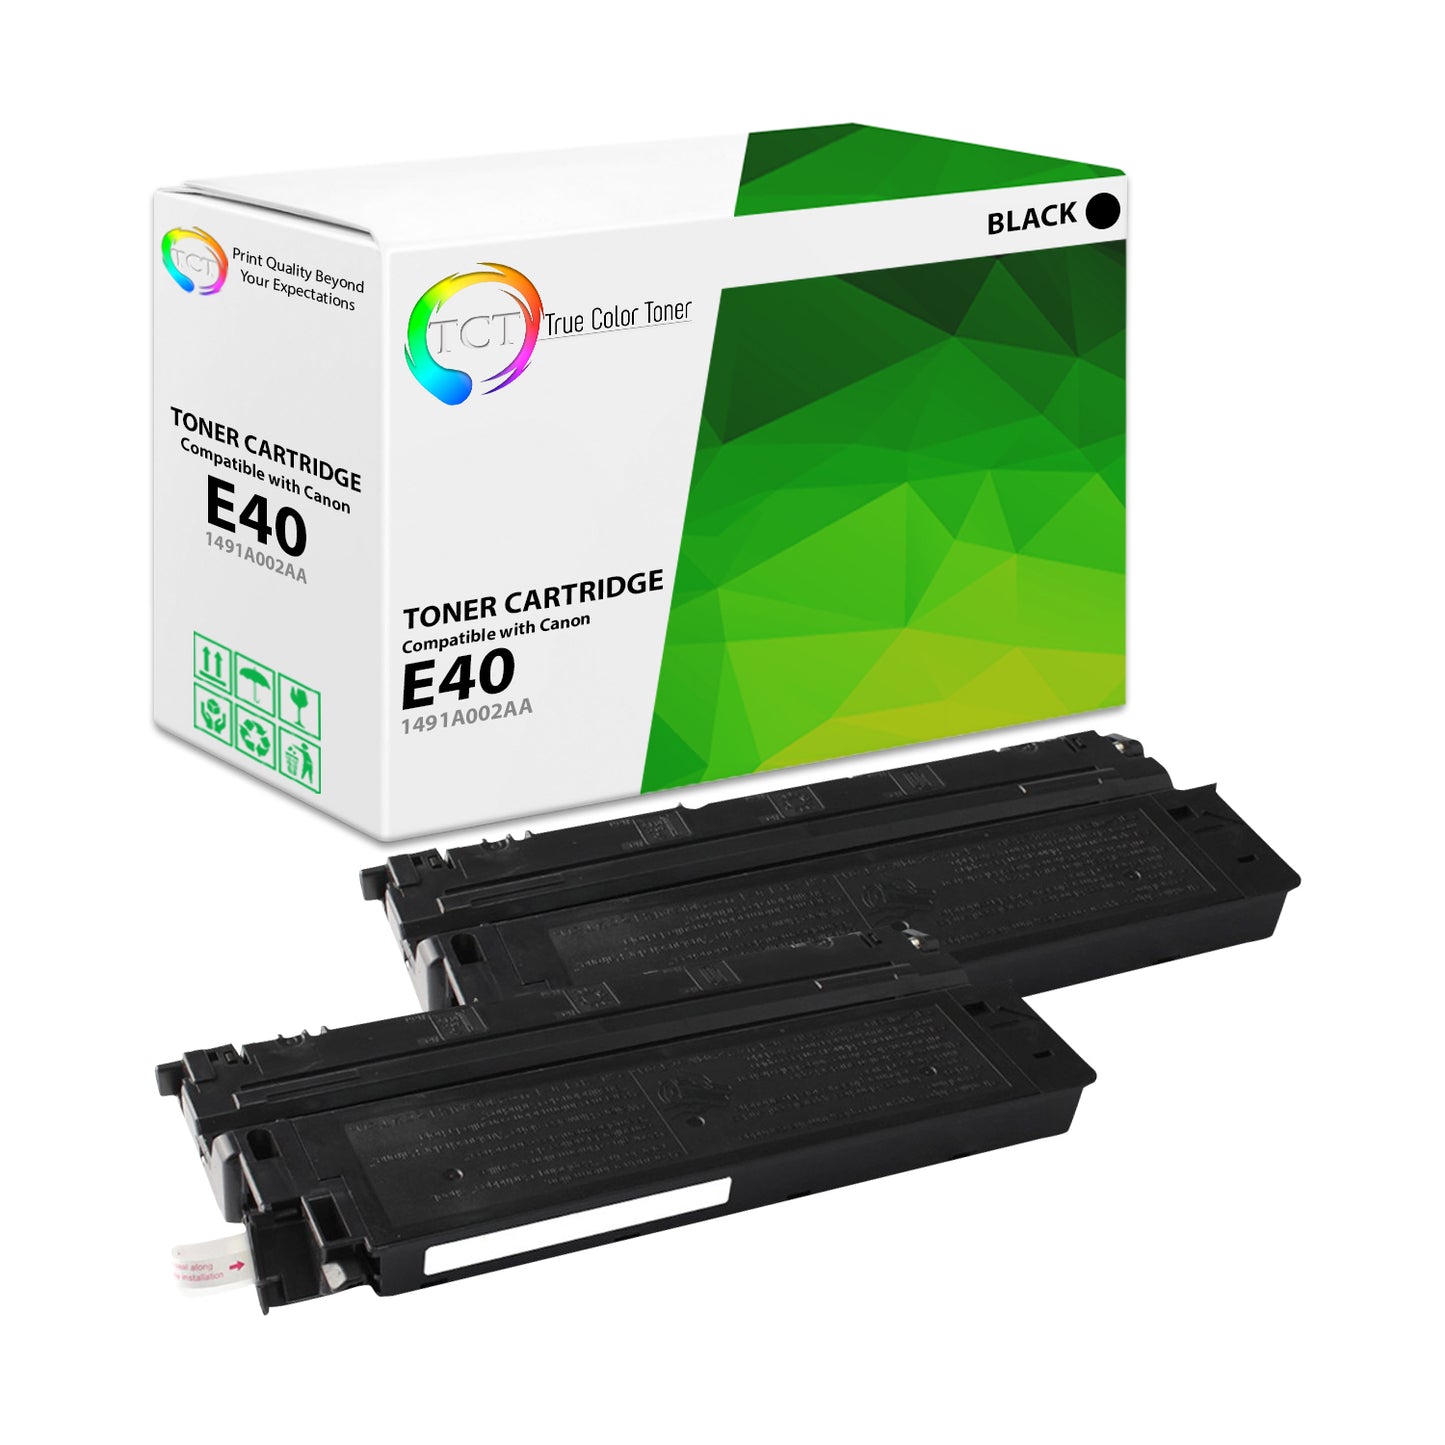 TCT Compatible Toner Cartridge Replacement for the Canon E40 Series - 2 Pack Black